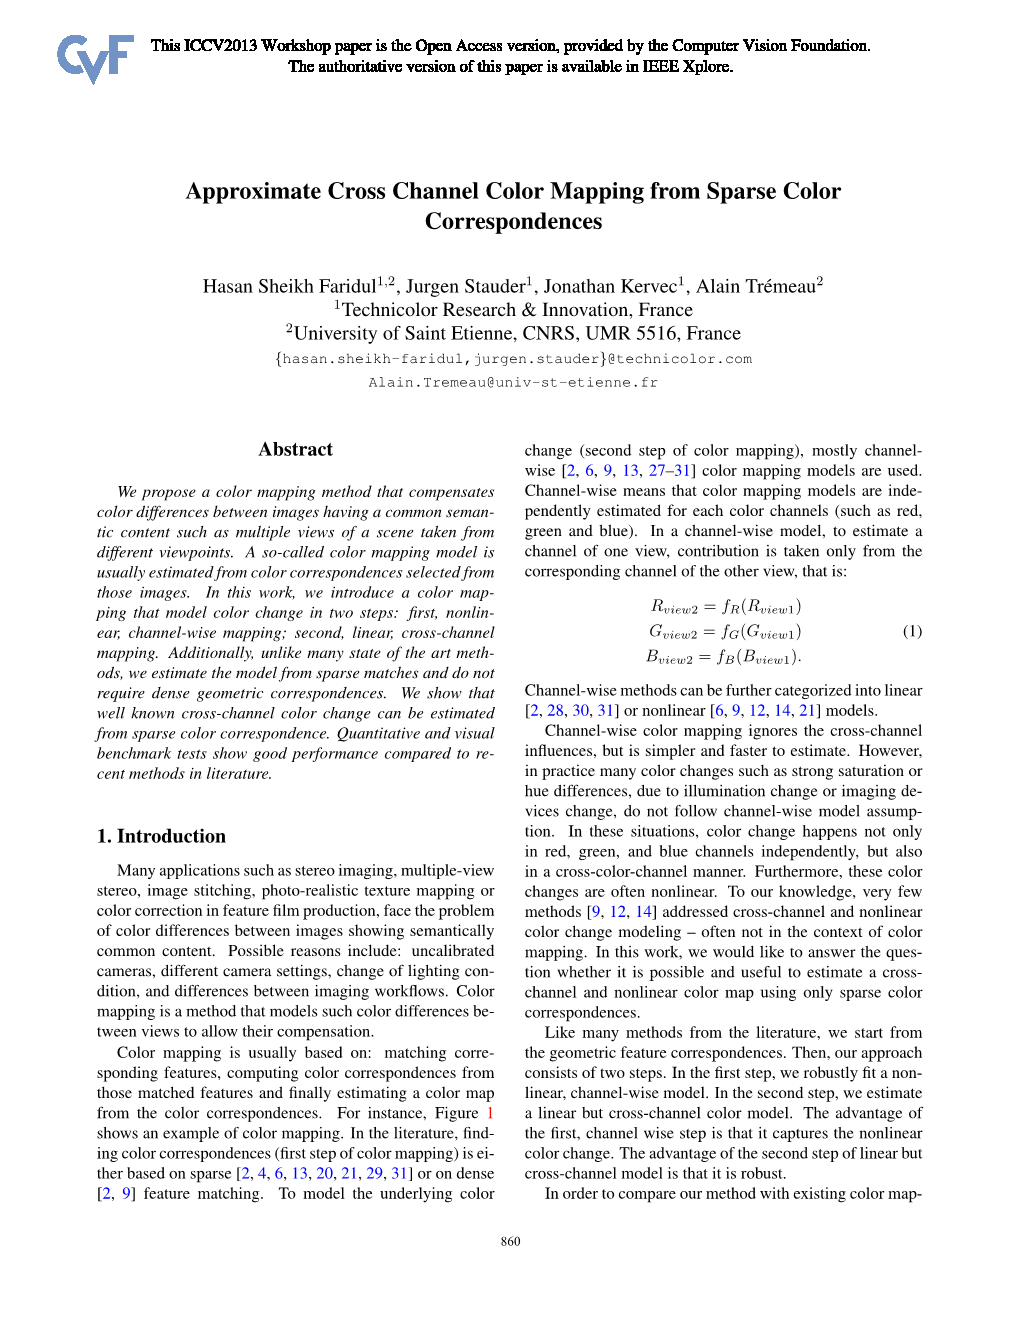 Approximate Cross Channel Color Mapping from Sparse Color Correspondences